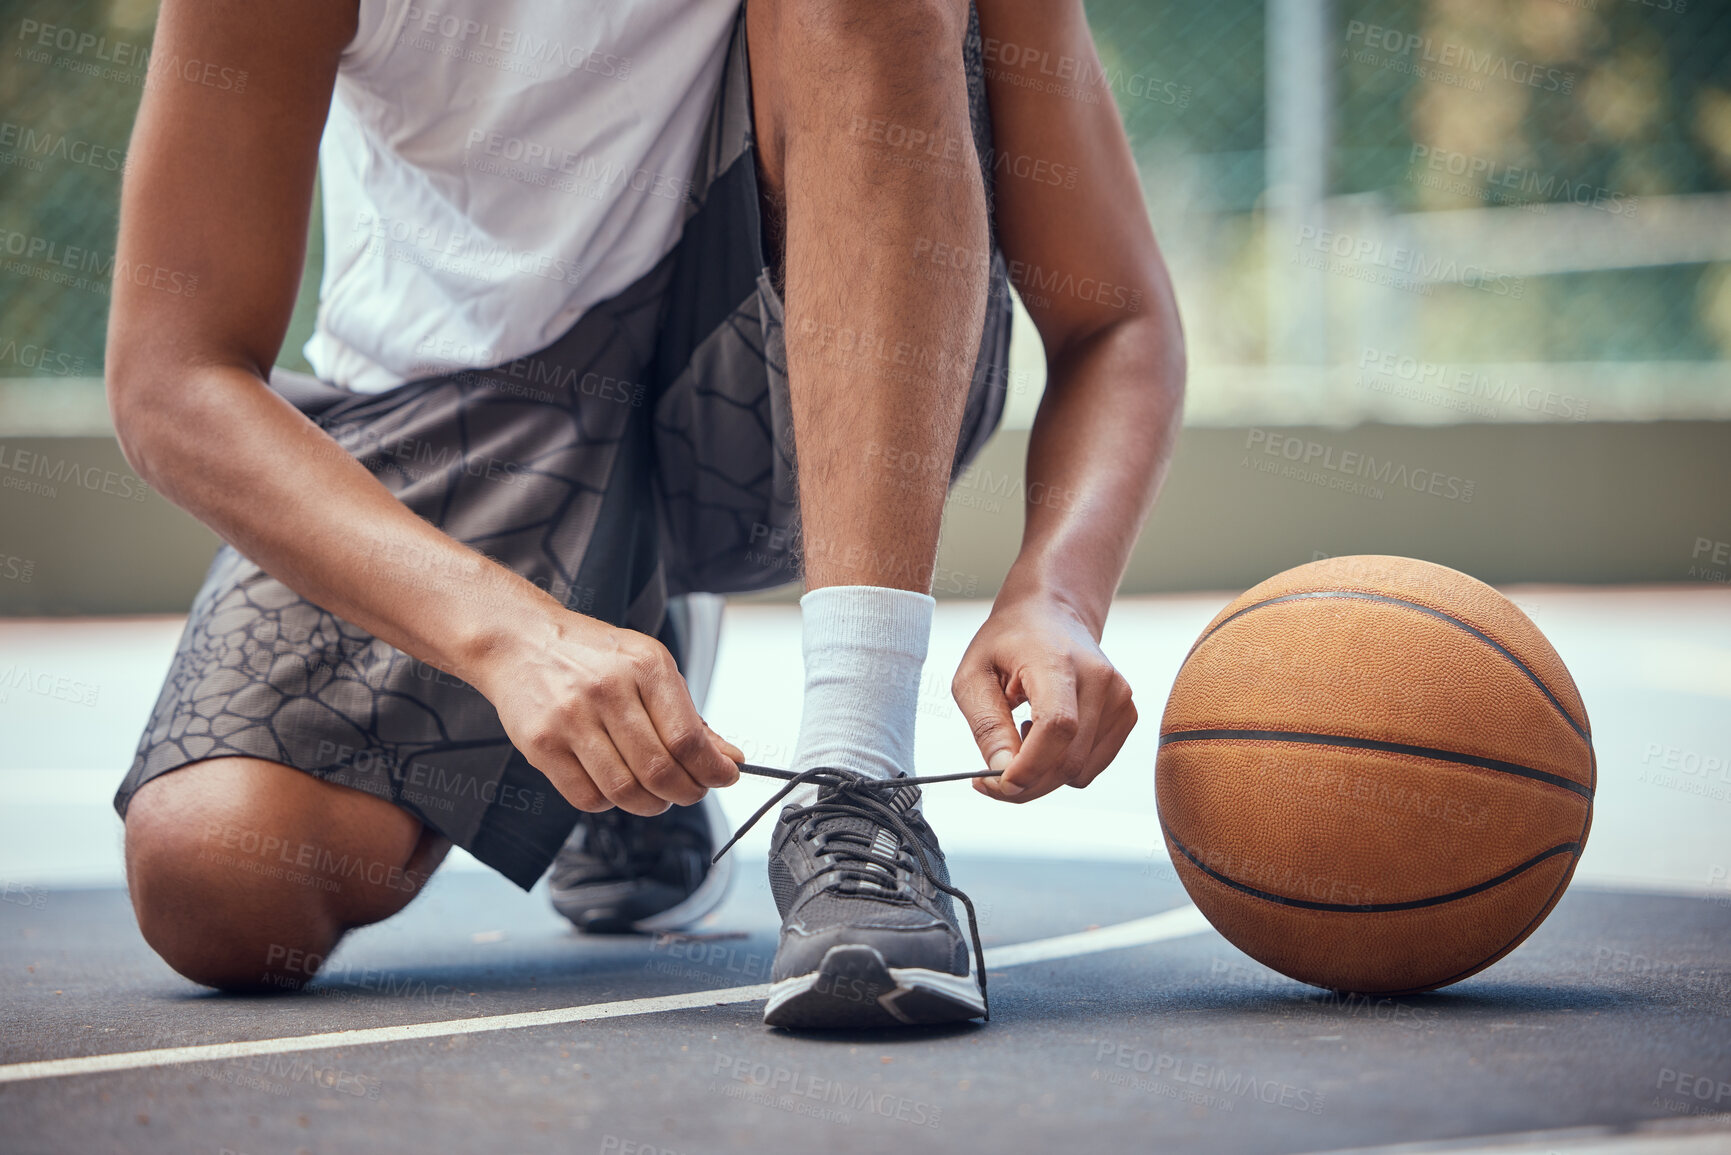 Buy stock photo Shoes, basketball and sports with a man basket ball player tying his laces on a court before a game or match. Workout, fitness and exercise with a male athlete outside for health, wellness and cardio